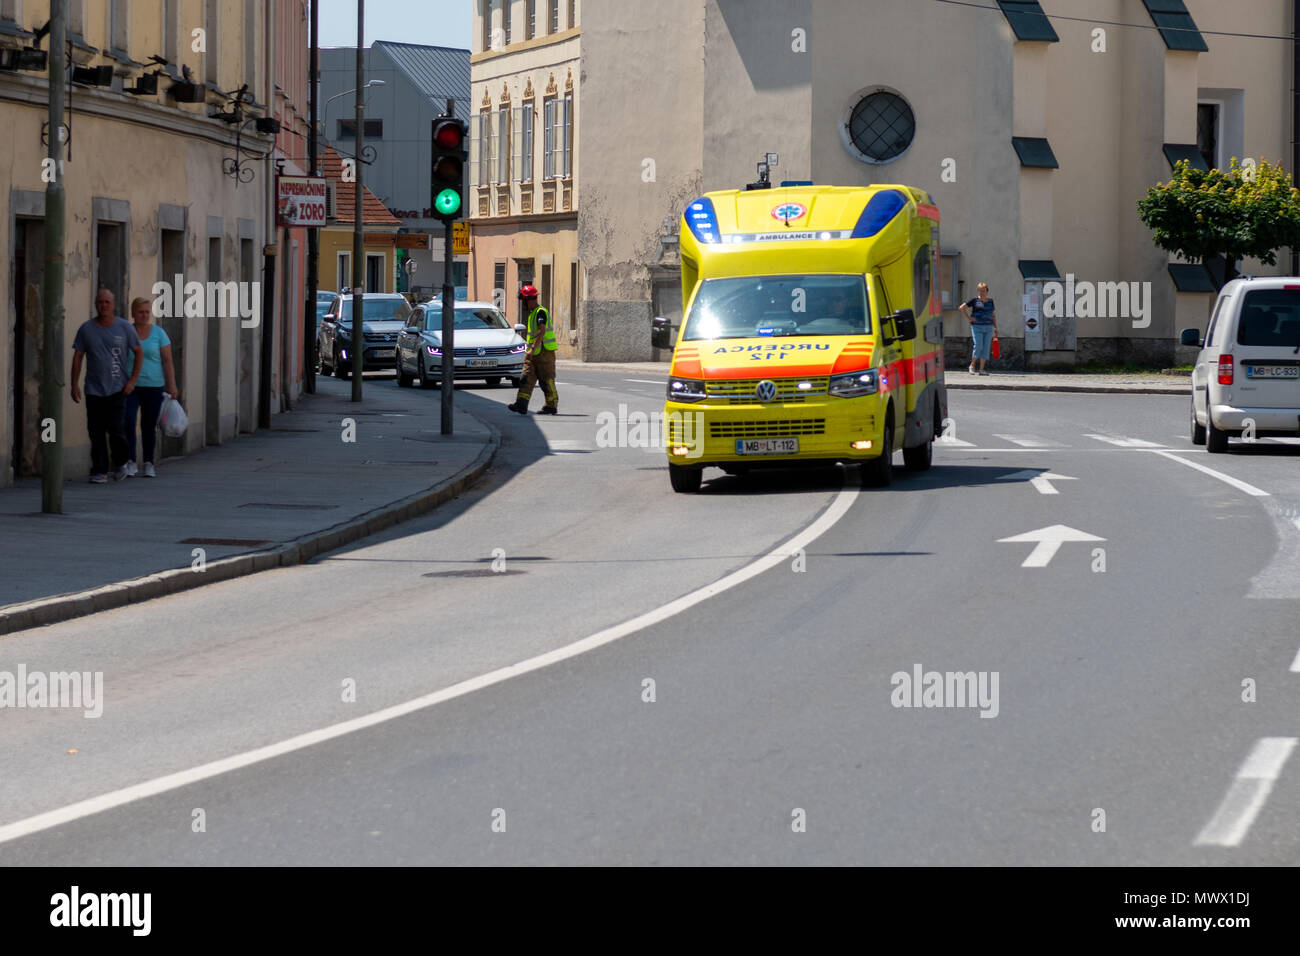 Slovenska Bistrica, Slovenia. June 2nd 2018.  Emergency Services Workers train in joint action with Rescuers, Firemen, Police and Red Cross in Slovenska Bistrica to ensure readiness in case of emergency. Majority of participants are volunteers in local fire brigades and Red Cross. Credit: Andrej Safaric/Alamy Live News Stock Photo